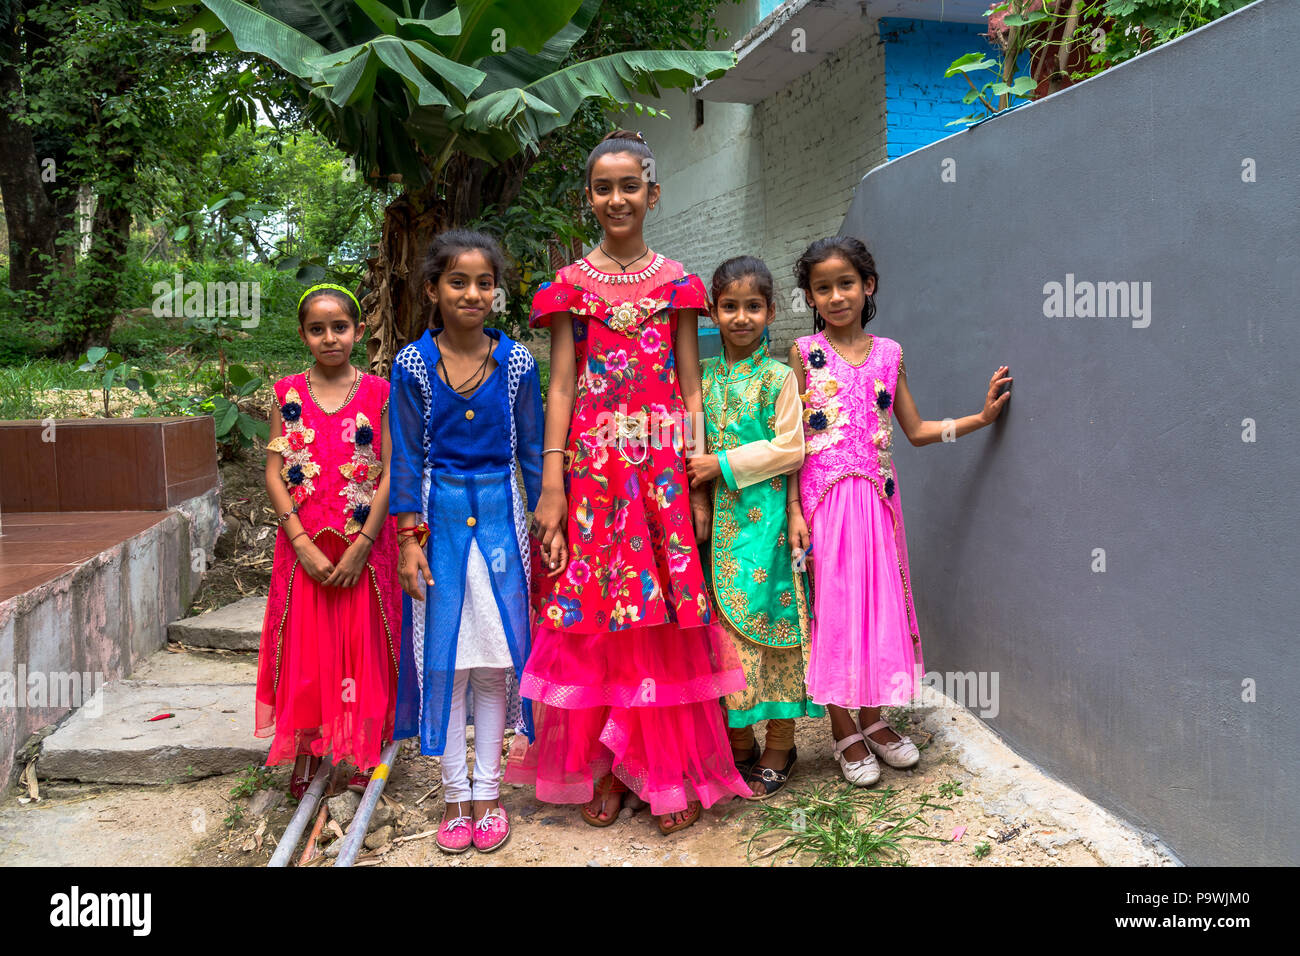 A group of little girls in traditional Indian costumes stands against a background of trees and a gray wall. Indie June 2018 Stock Photo